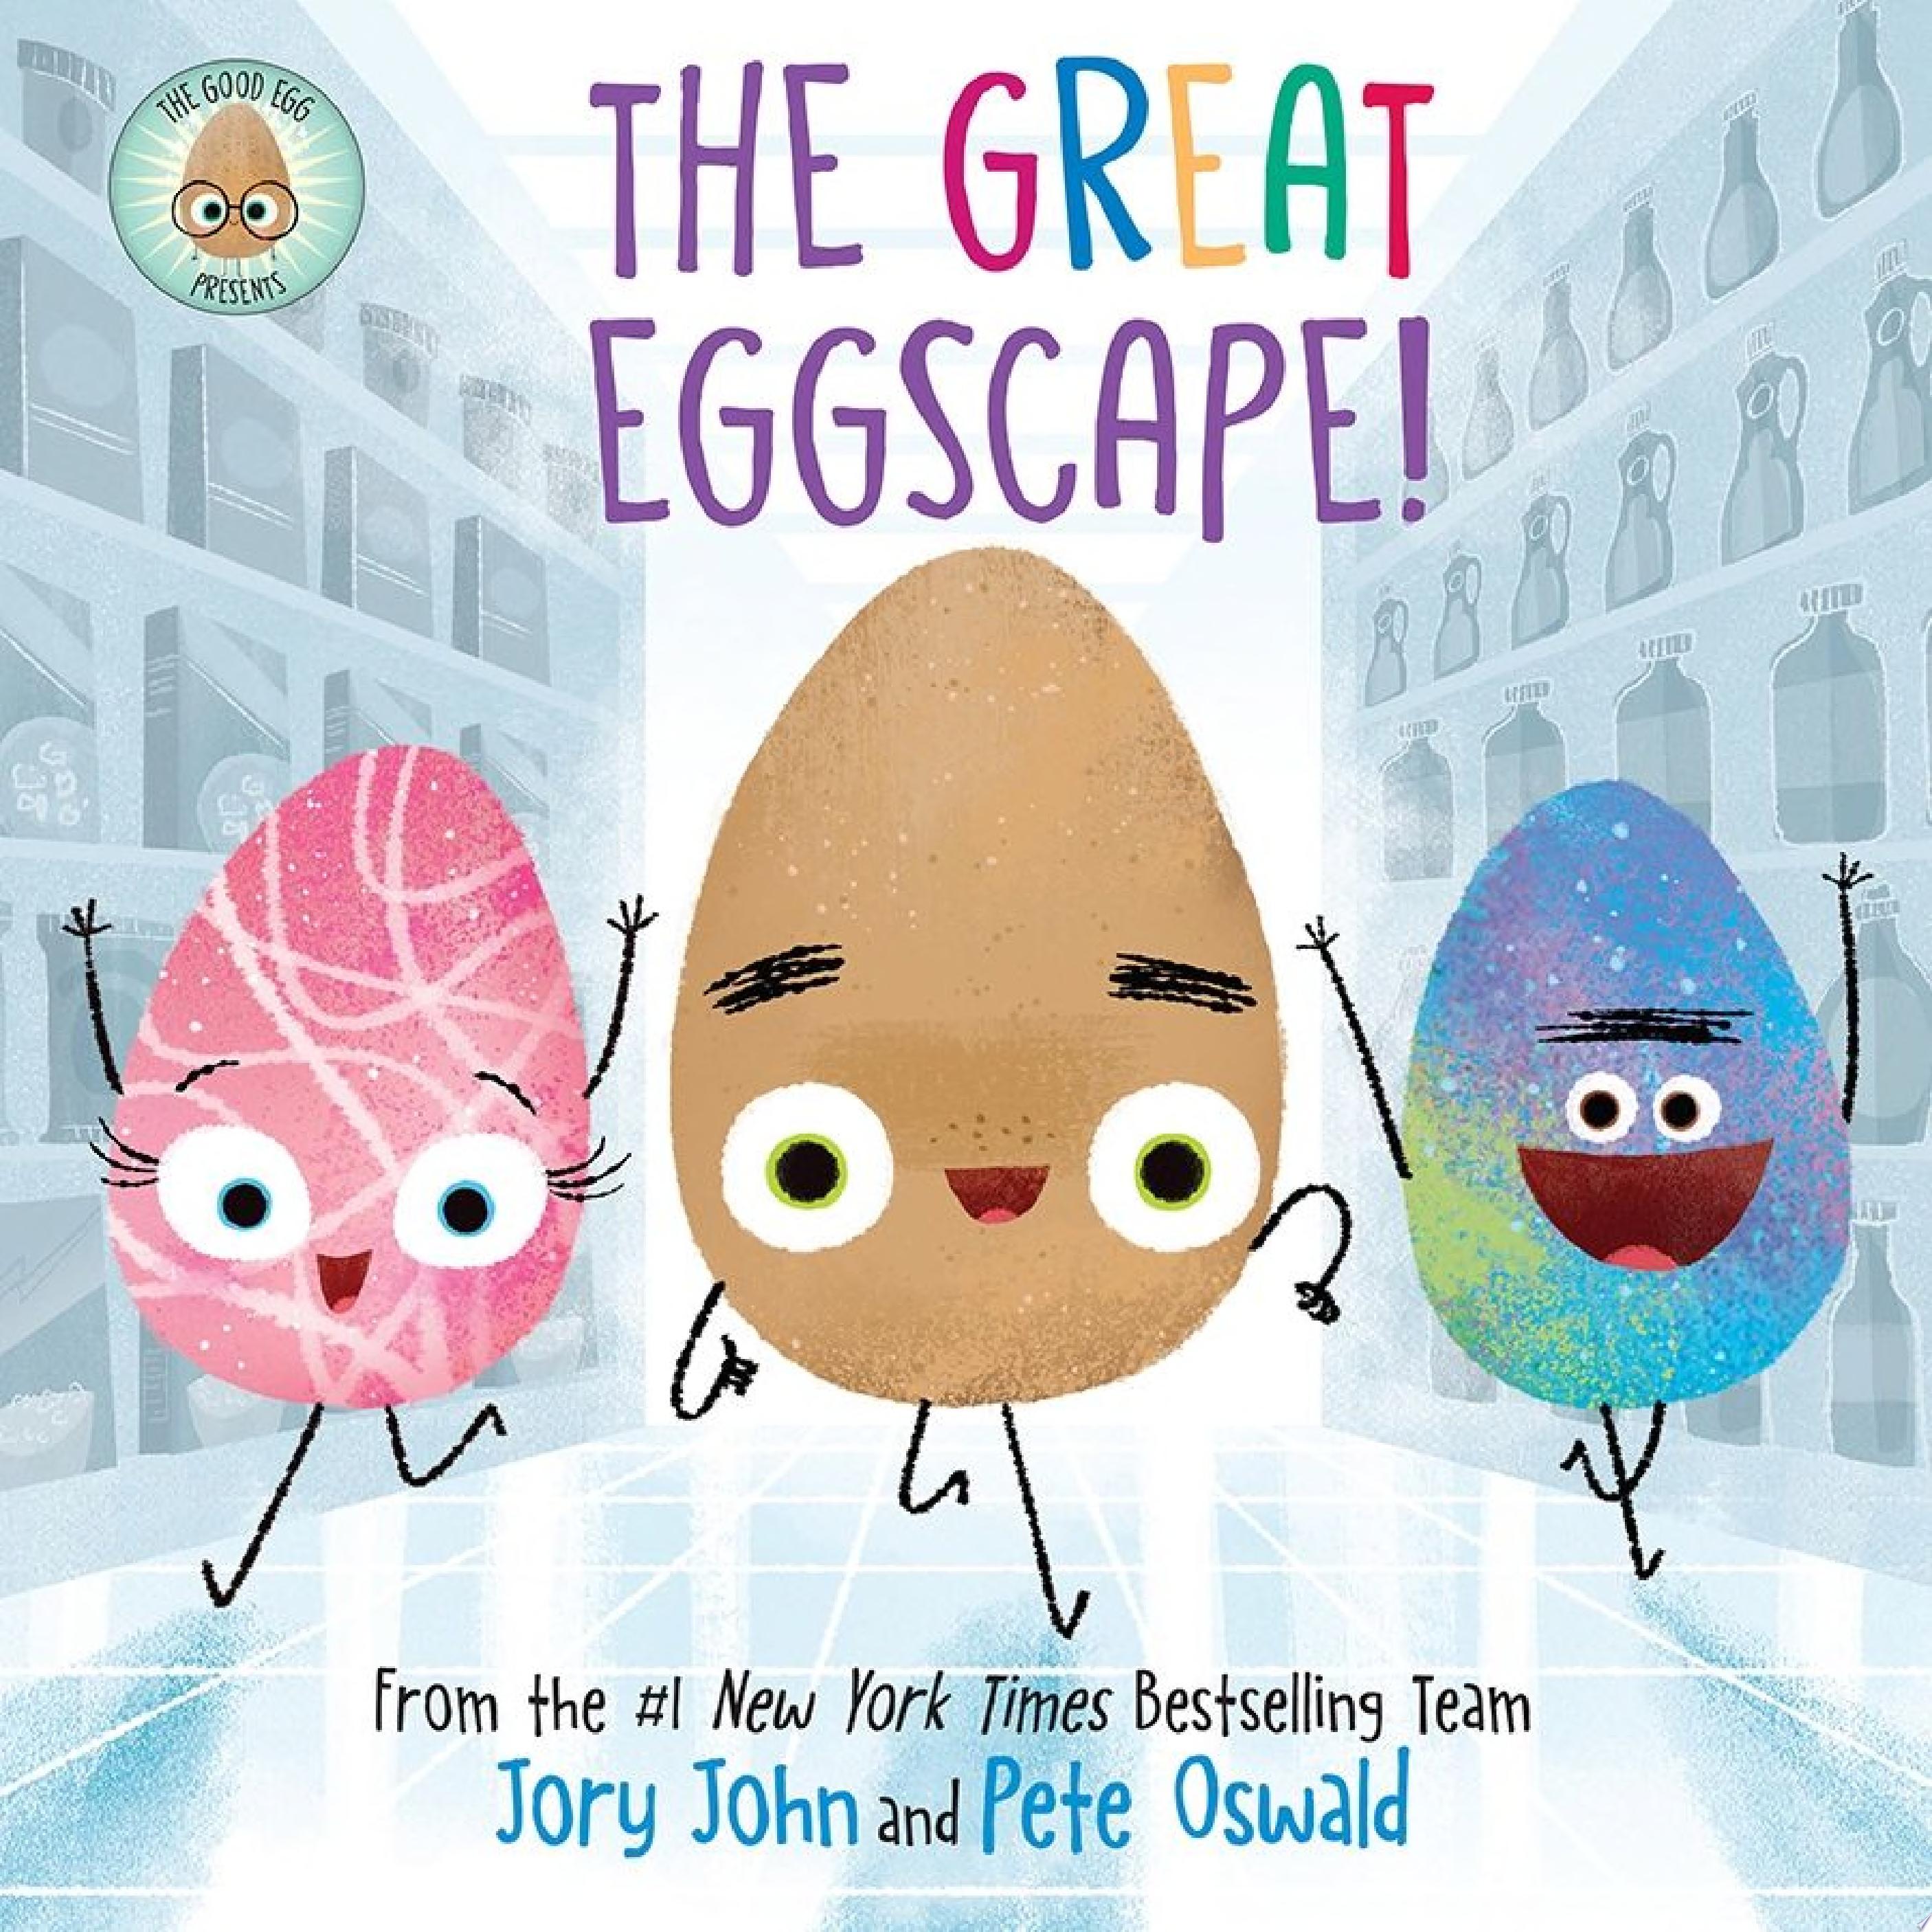 Image for "The Good Egg Presents: The Great Eggscape!"